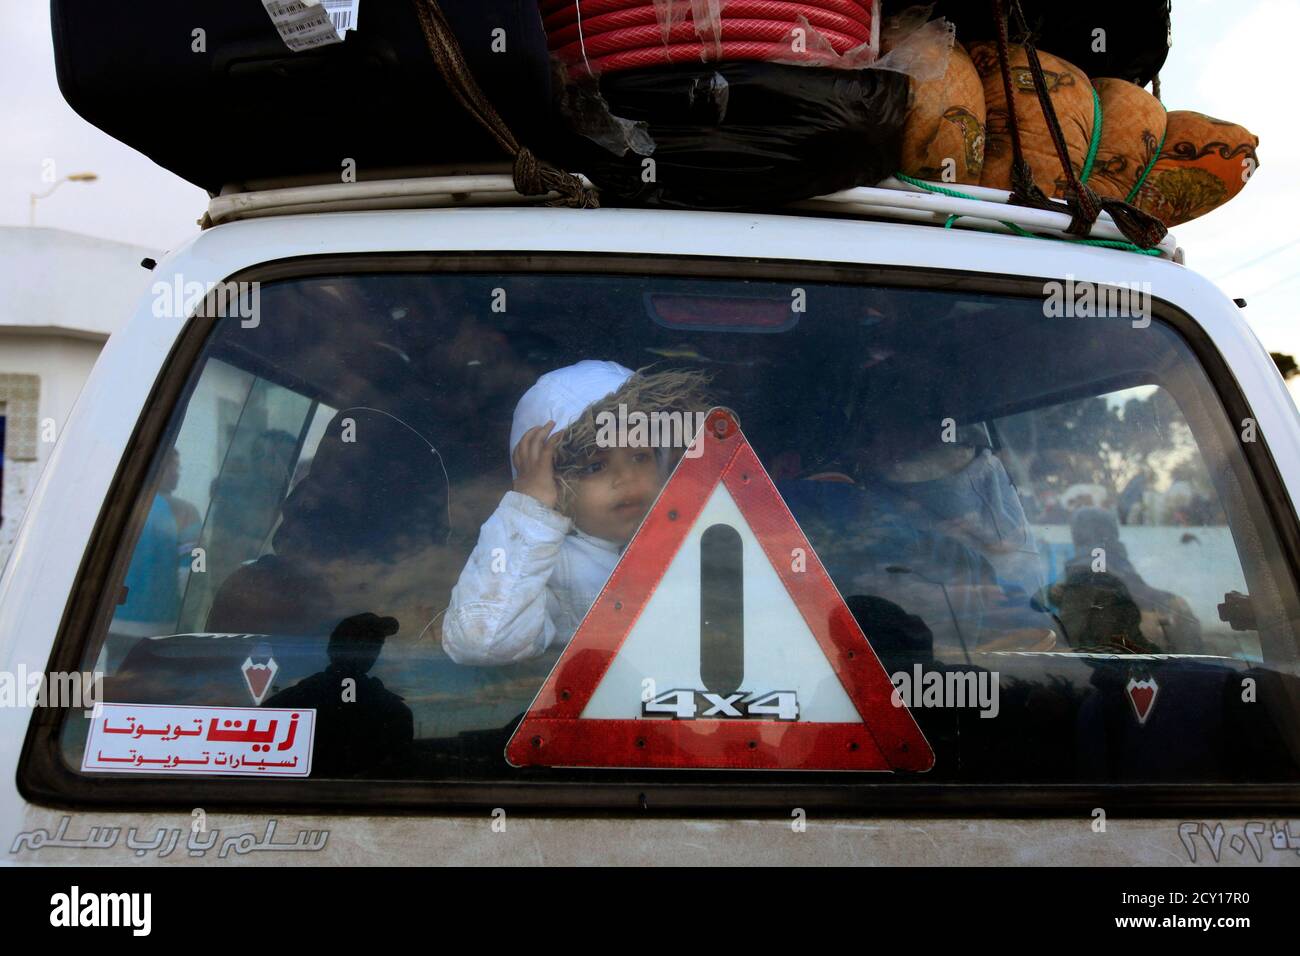 A Tunisian girl looks through the window of a van after she crosses the border into Tunisia at the border crossing of Ras Jdir after fleeing unrest in Libya February 23, 2011. Thousands of Tunisians are fleeing Libya, many across its western land border, after a bloody crackdown on protests against the rule of Muammar Gaddafi, state media reported on Tuesday. Tunisia has at least 30,000 nationals in Libya and officials fear they could become targets because of Tunisia's role in inspiring uprisings across the Arab world. Tunisia's leader was overthrown in January, and Egypt's president fell on  Stock Photo